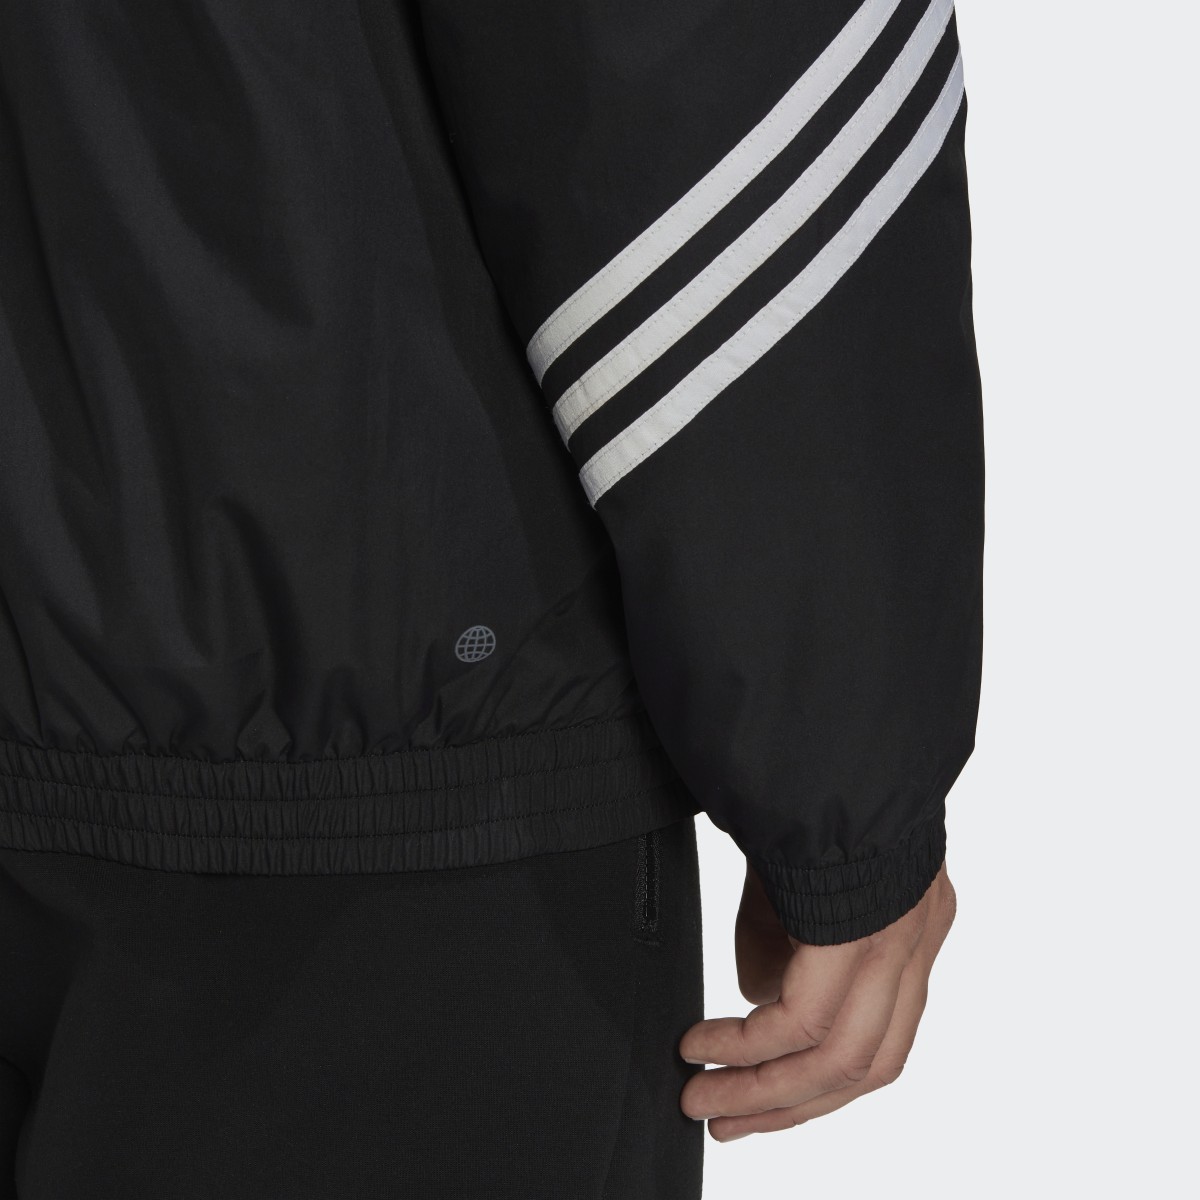 Adidas Back to Sport Hooded Jacket. 9